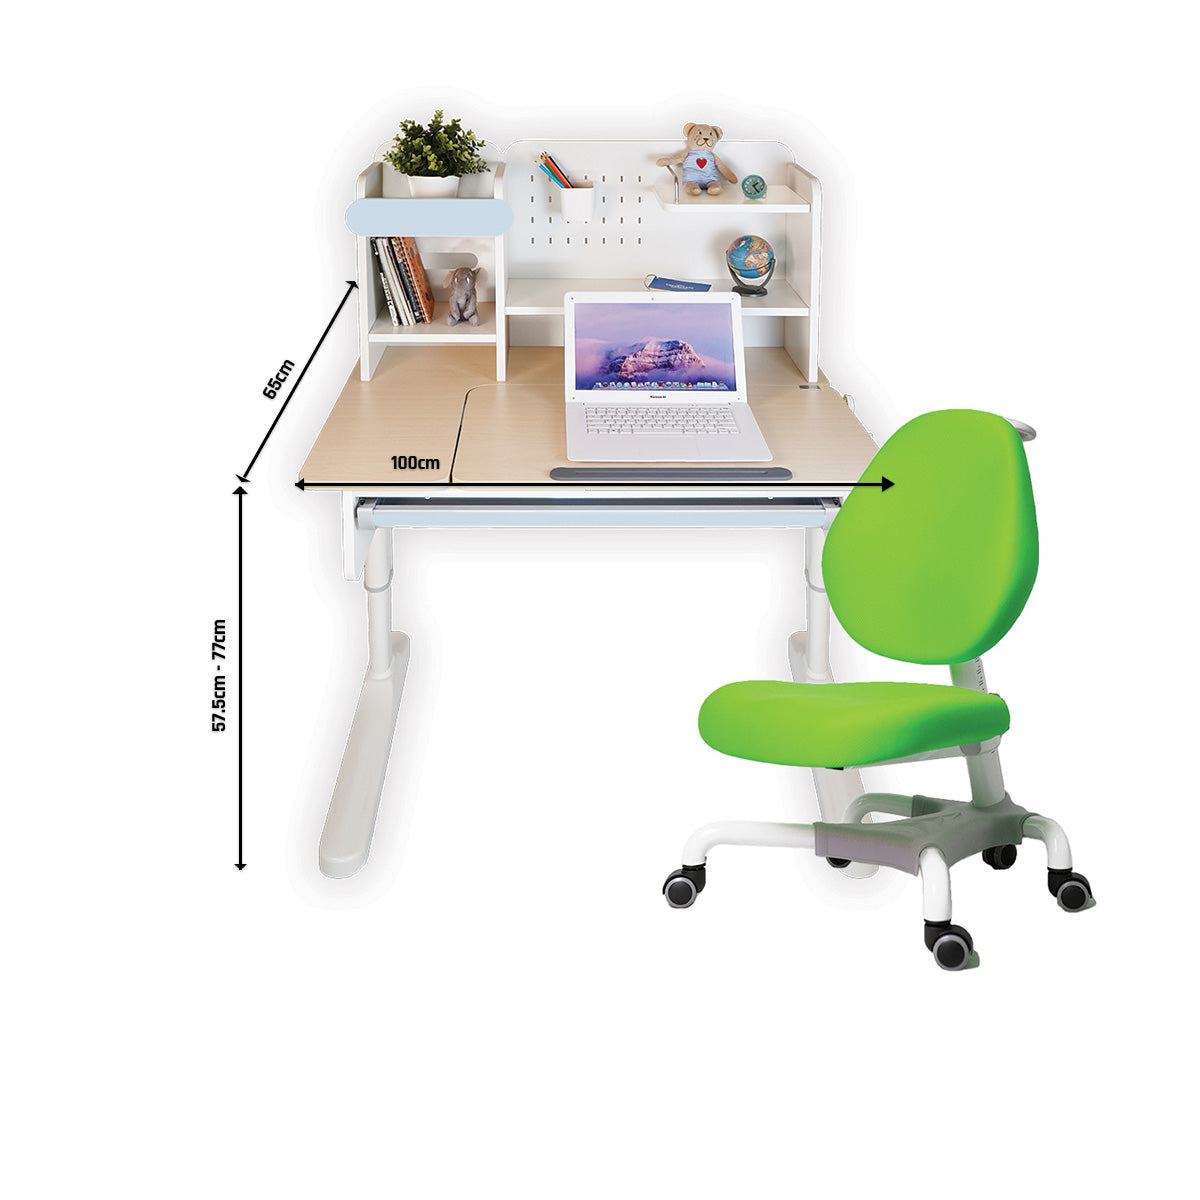 Impact Ergo-Growing Study Desk And Chair Set 1000mm x 650mm, IM-G1000A-GY (Ready Stocks)